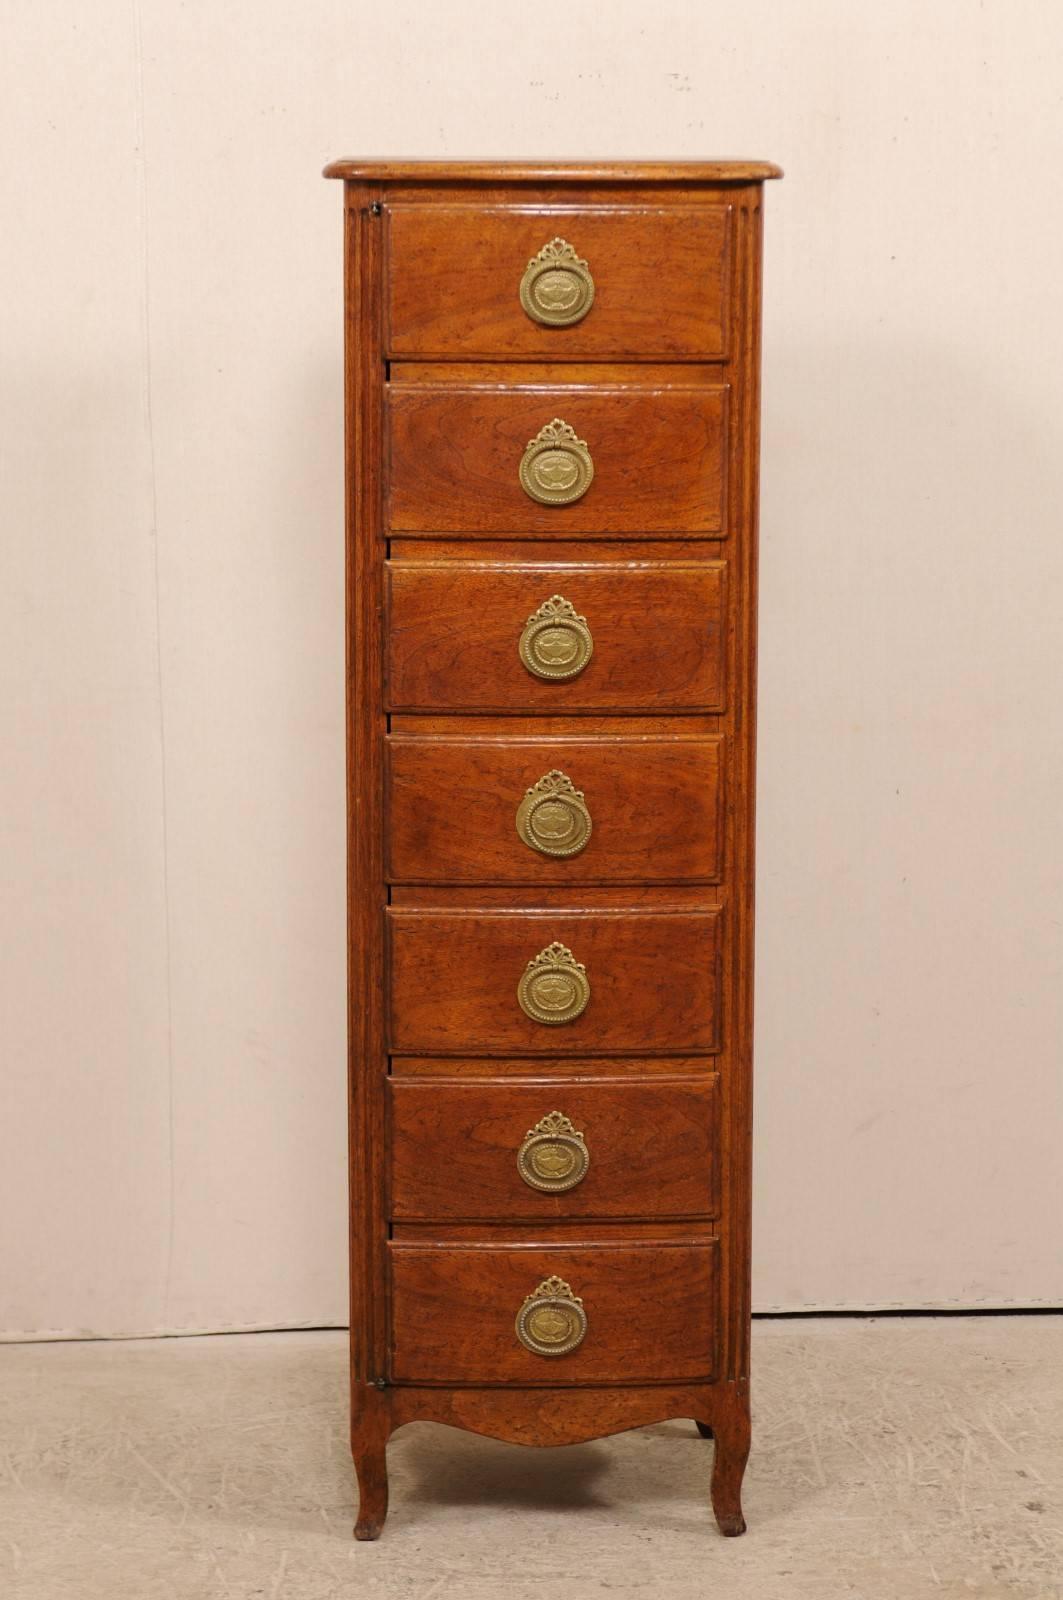 A French fruit wood cabinet from the early 20th century with faux drawers front. This antique French cabinet features a semainier (or semaniere) designed front, which is actually seven faux drawers that top as a single door to reveal an open cabinet